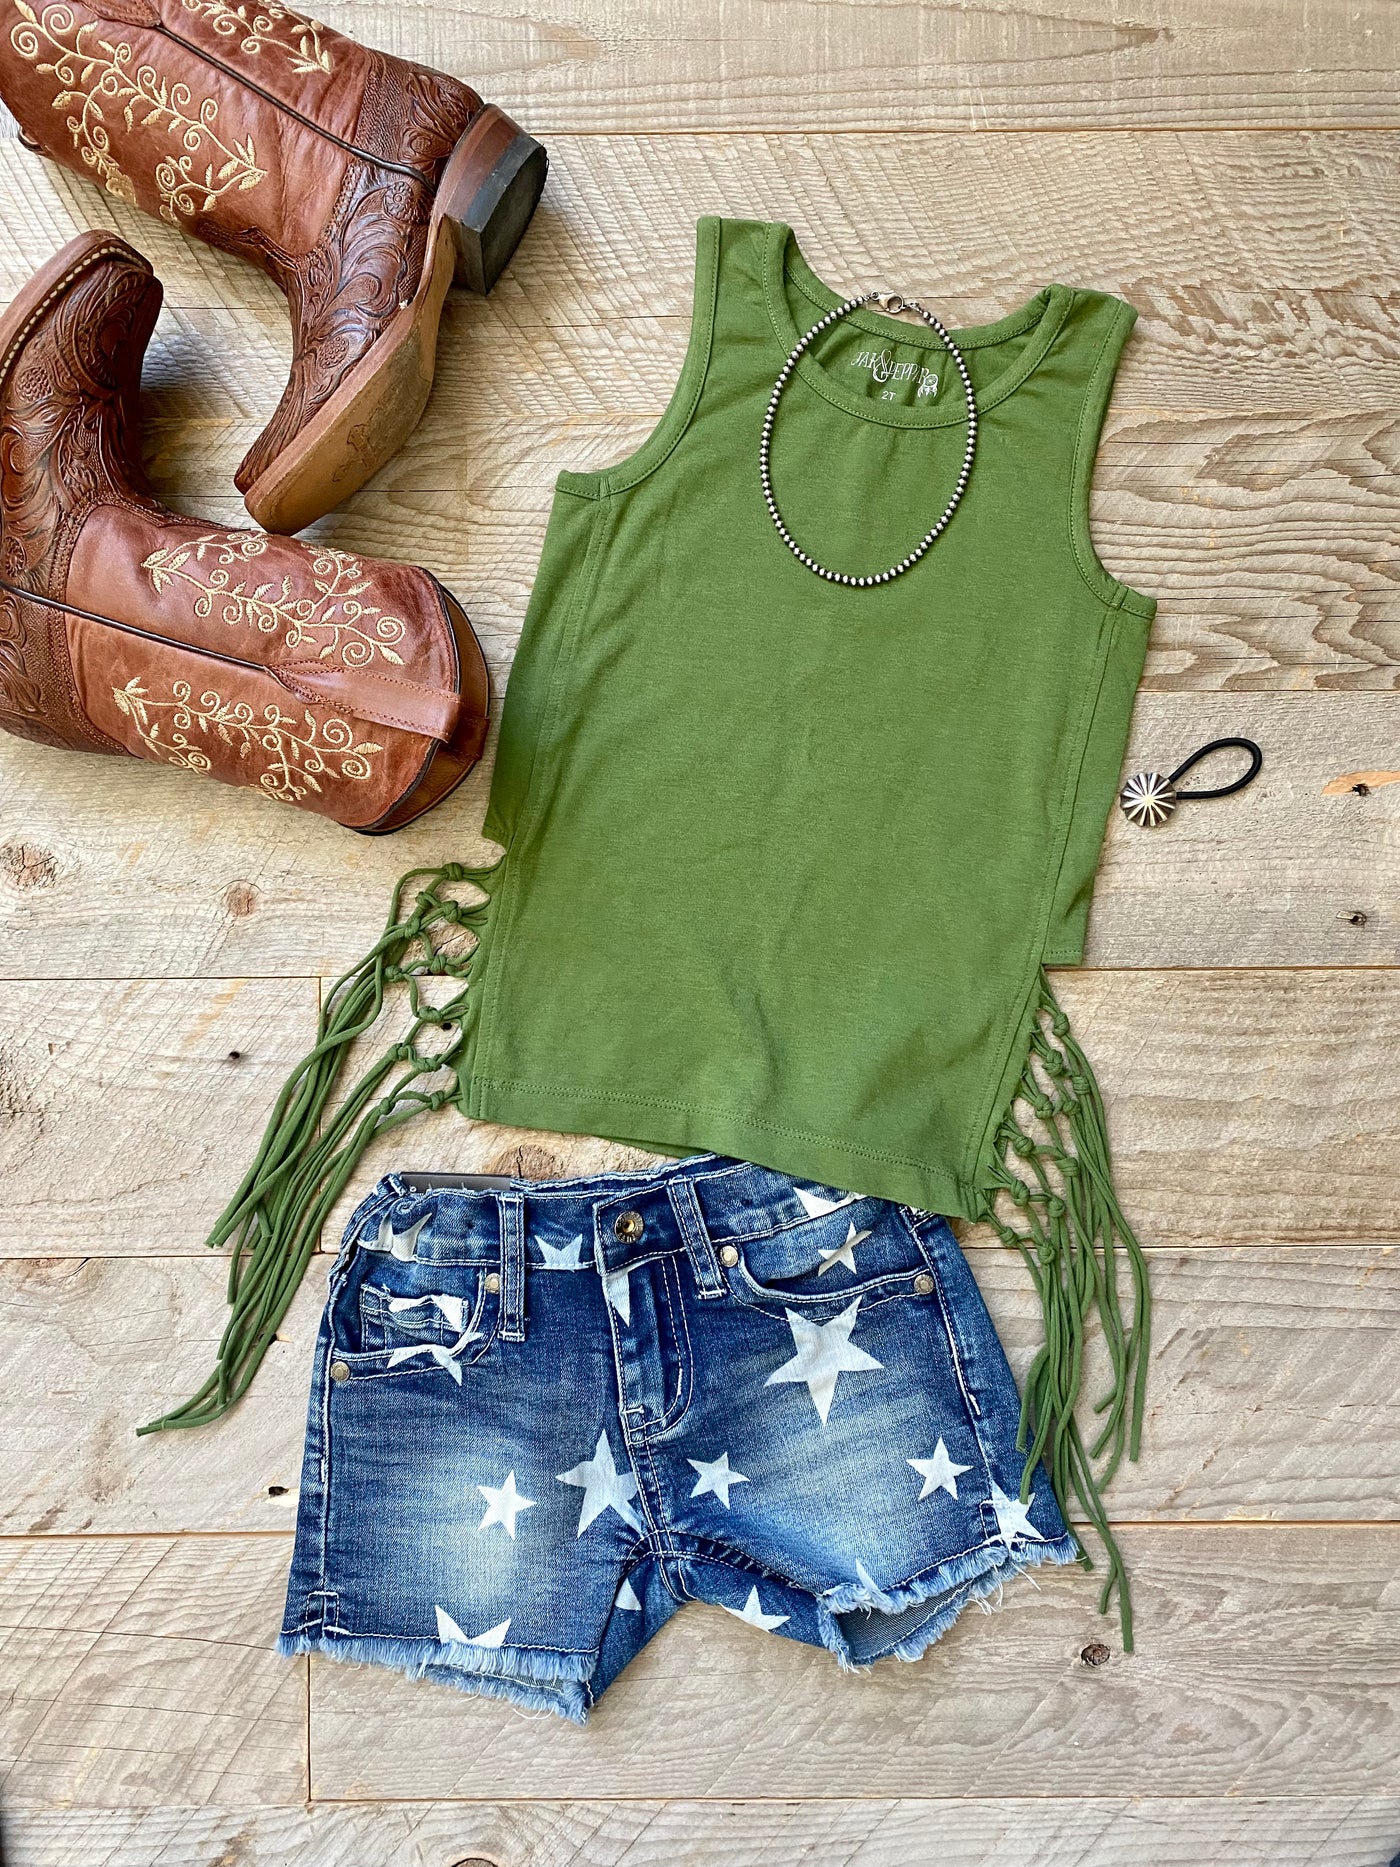 The Finley Fringe Tank Top